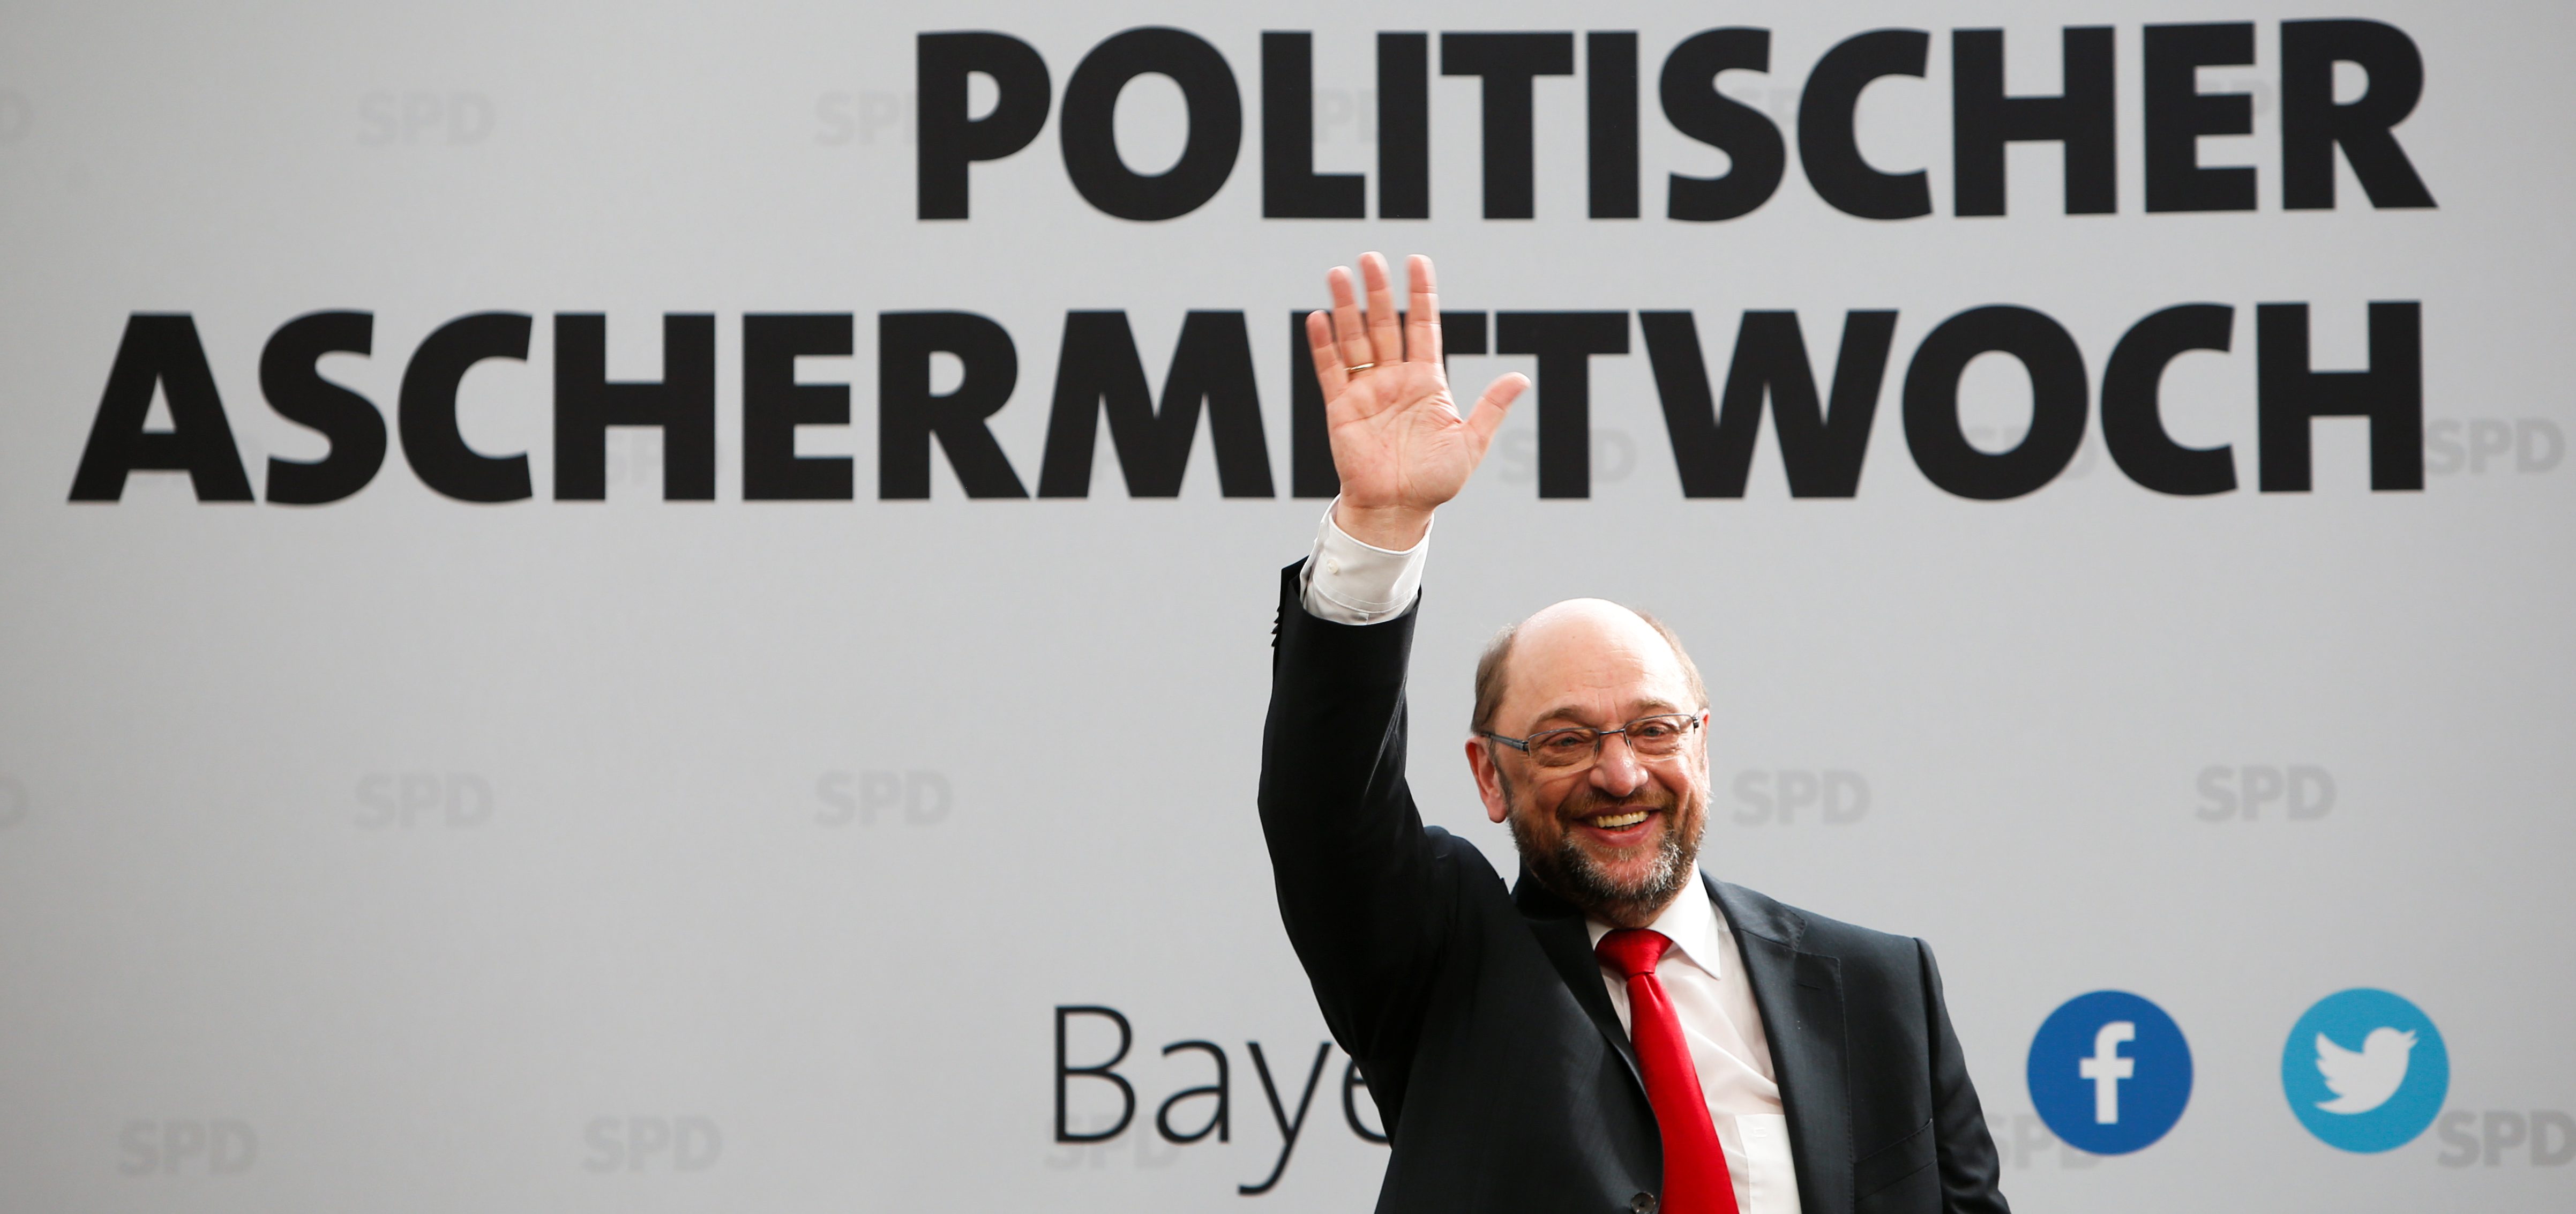 Meet Martin Schulz, the Europhile populist shaking up Germany's elections |  Brookings